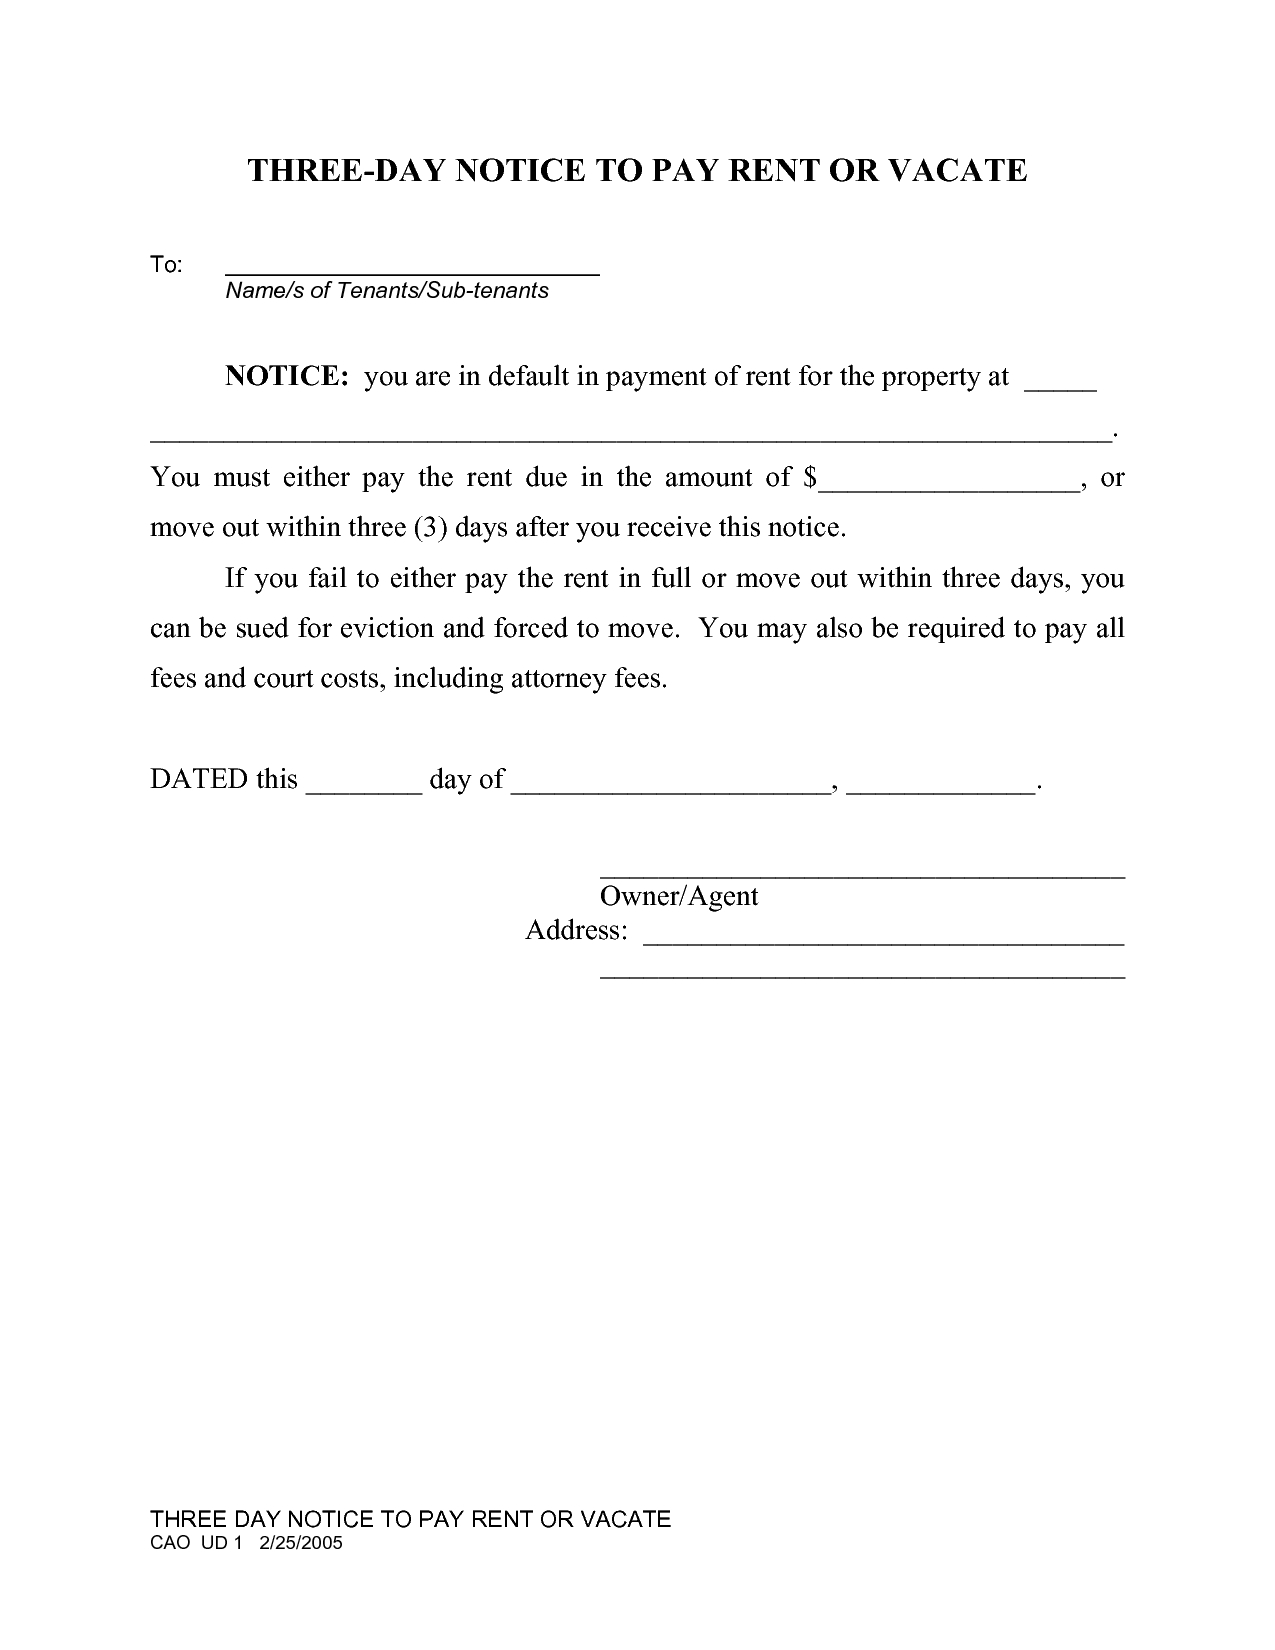 Eviction Notice Template | Scope Of Work Template | Ideas For The - Free Printable Eviction Notice